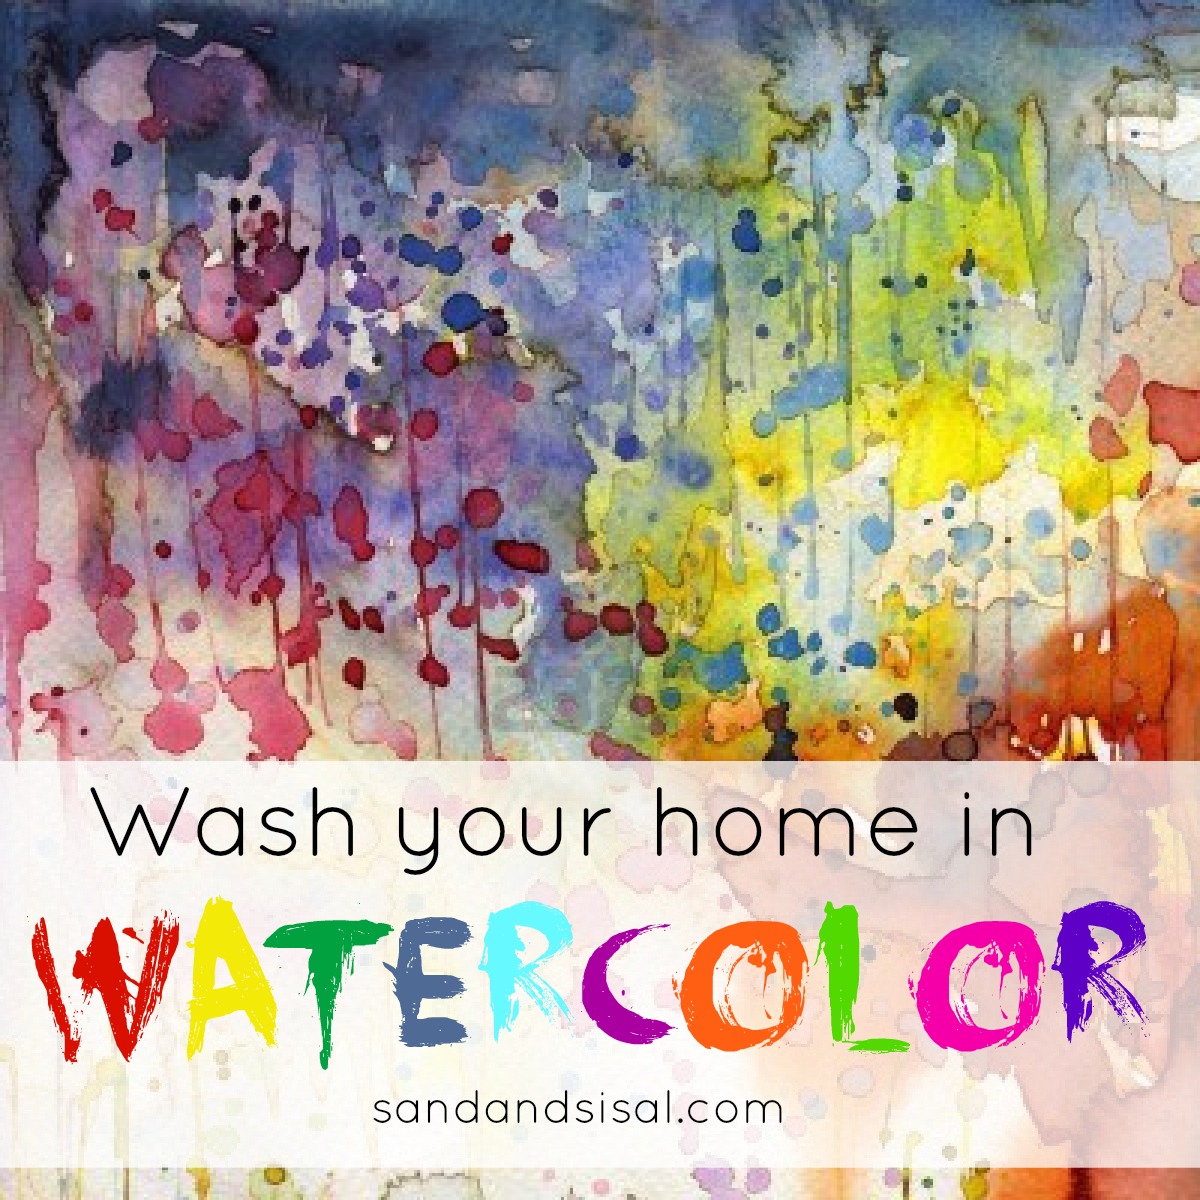 Wash your home in watercolor - c4a.bc9.myftpupload.com